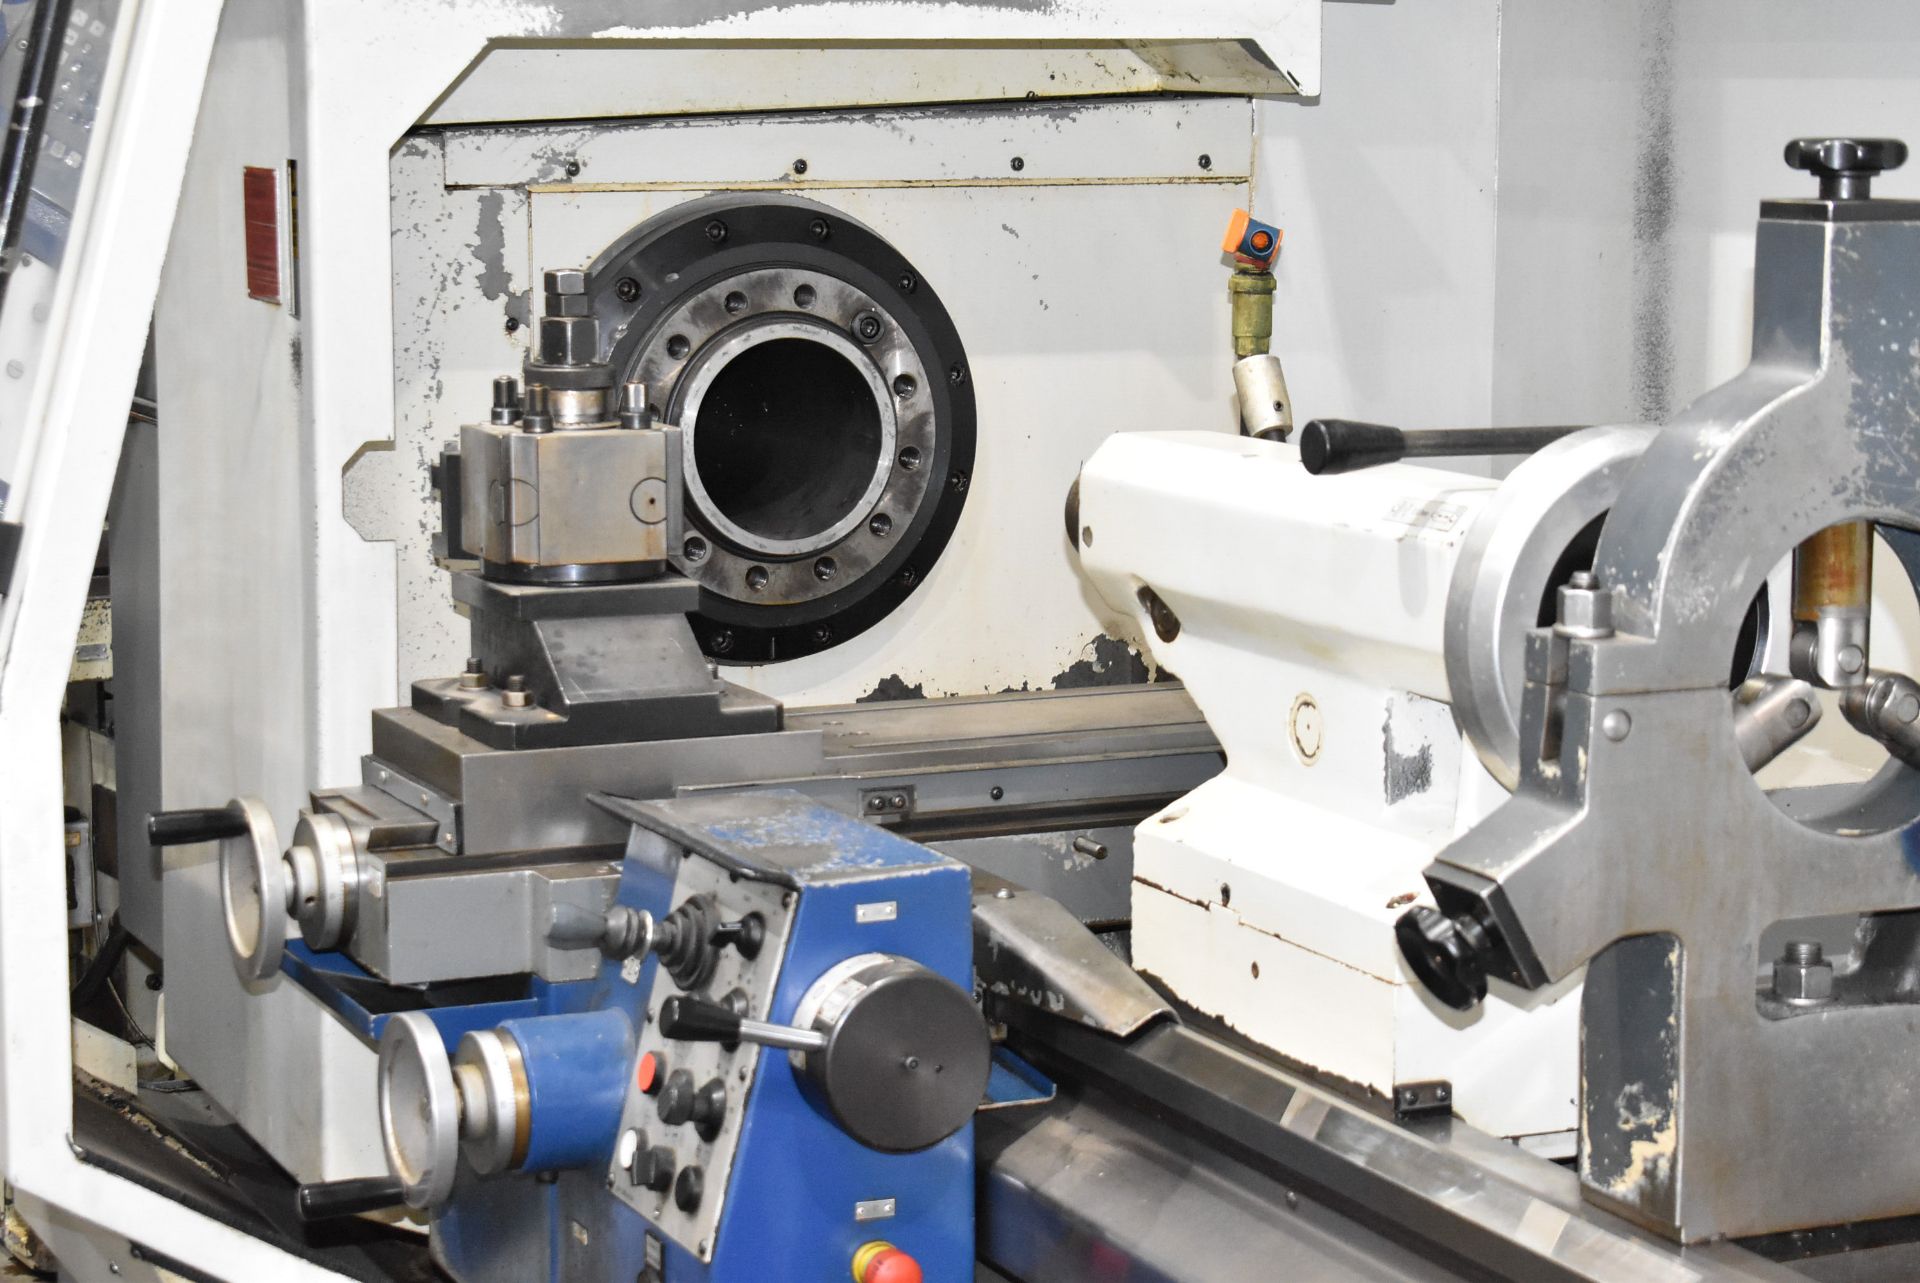 WEILER (2013) E50X2000-165 CNC LATHE WITH WEILER CNC CONTROL, 4-JAW CHUCK, 22.44" SWING OVER BED, - Image 3 of 11